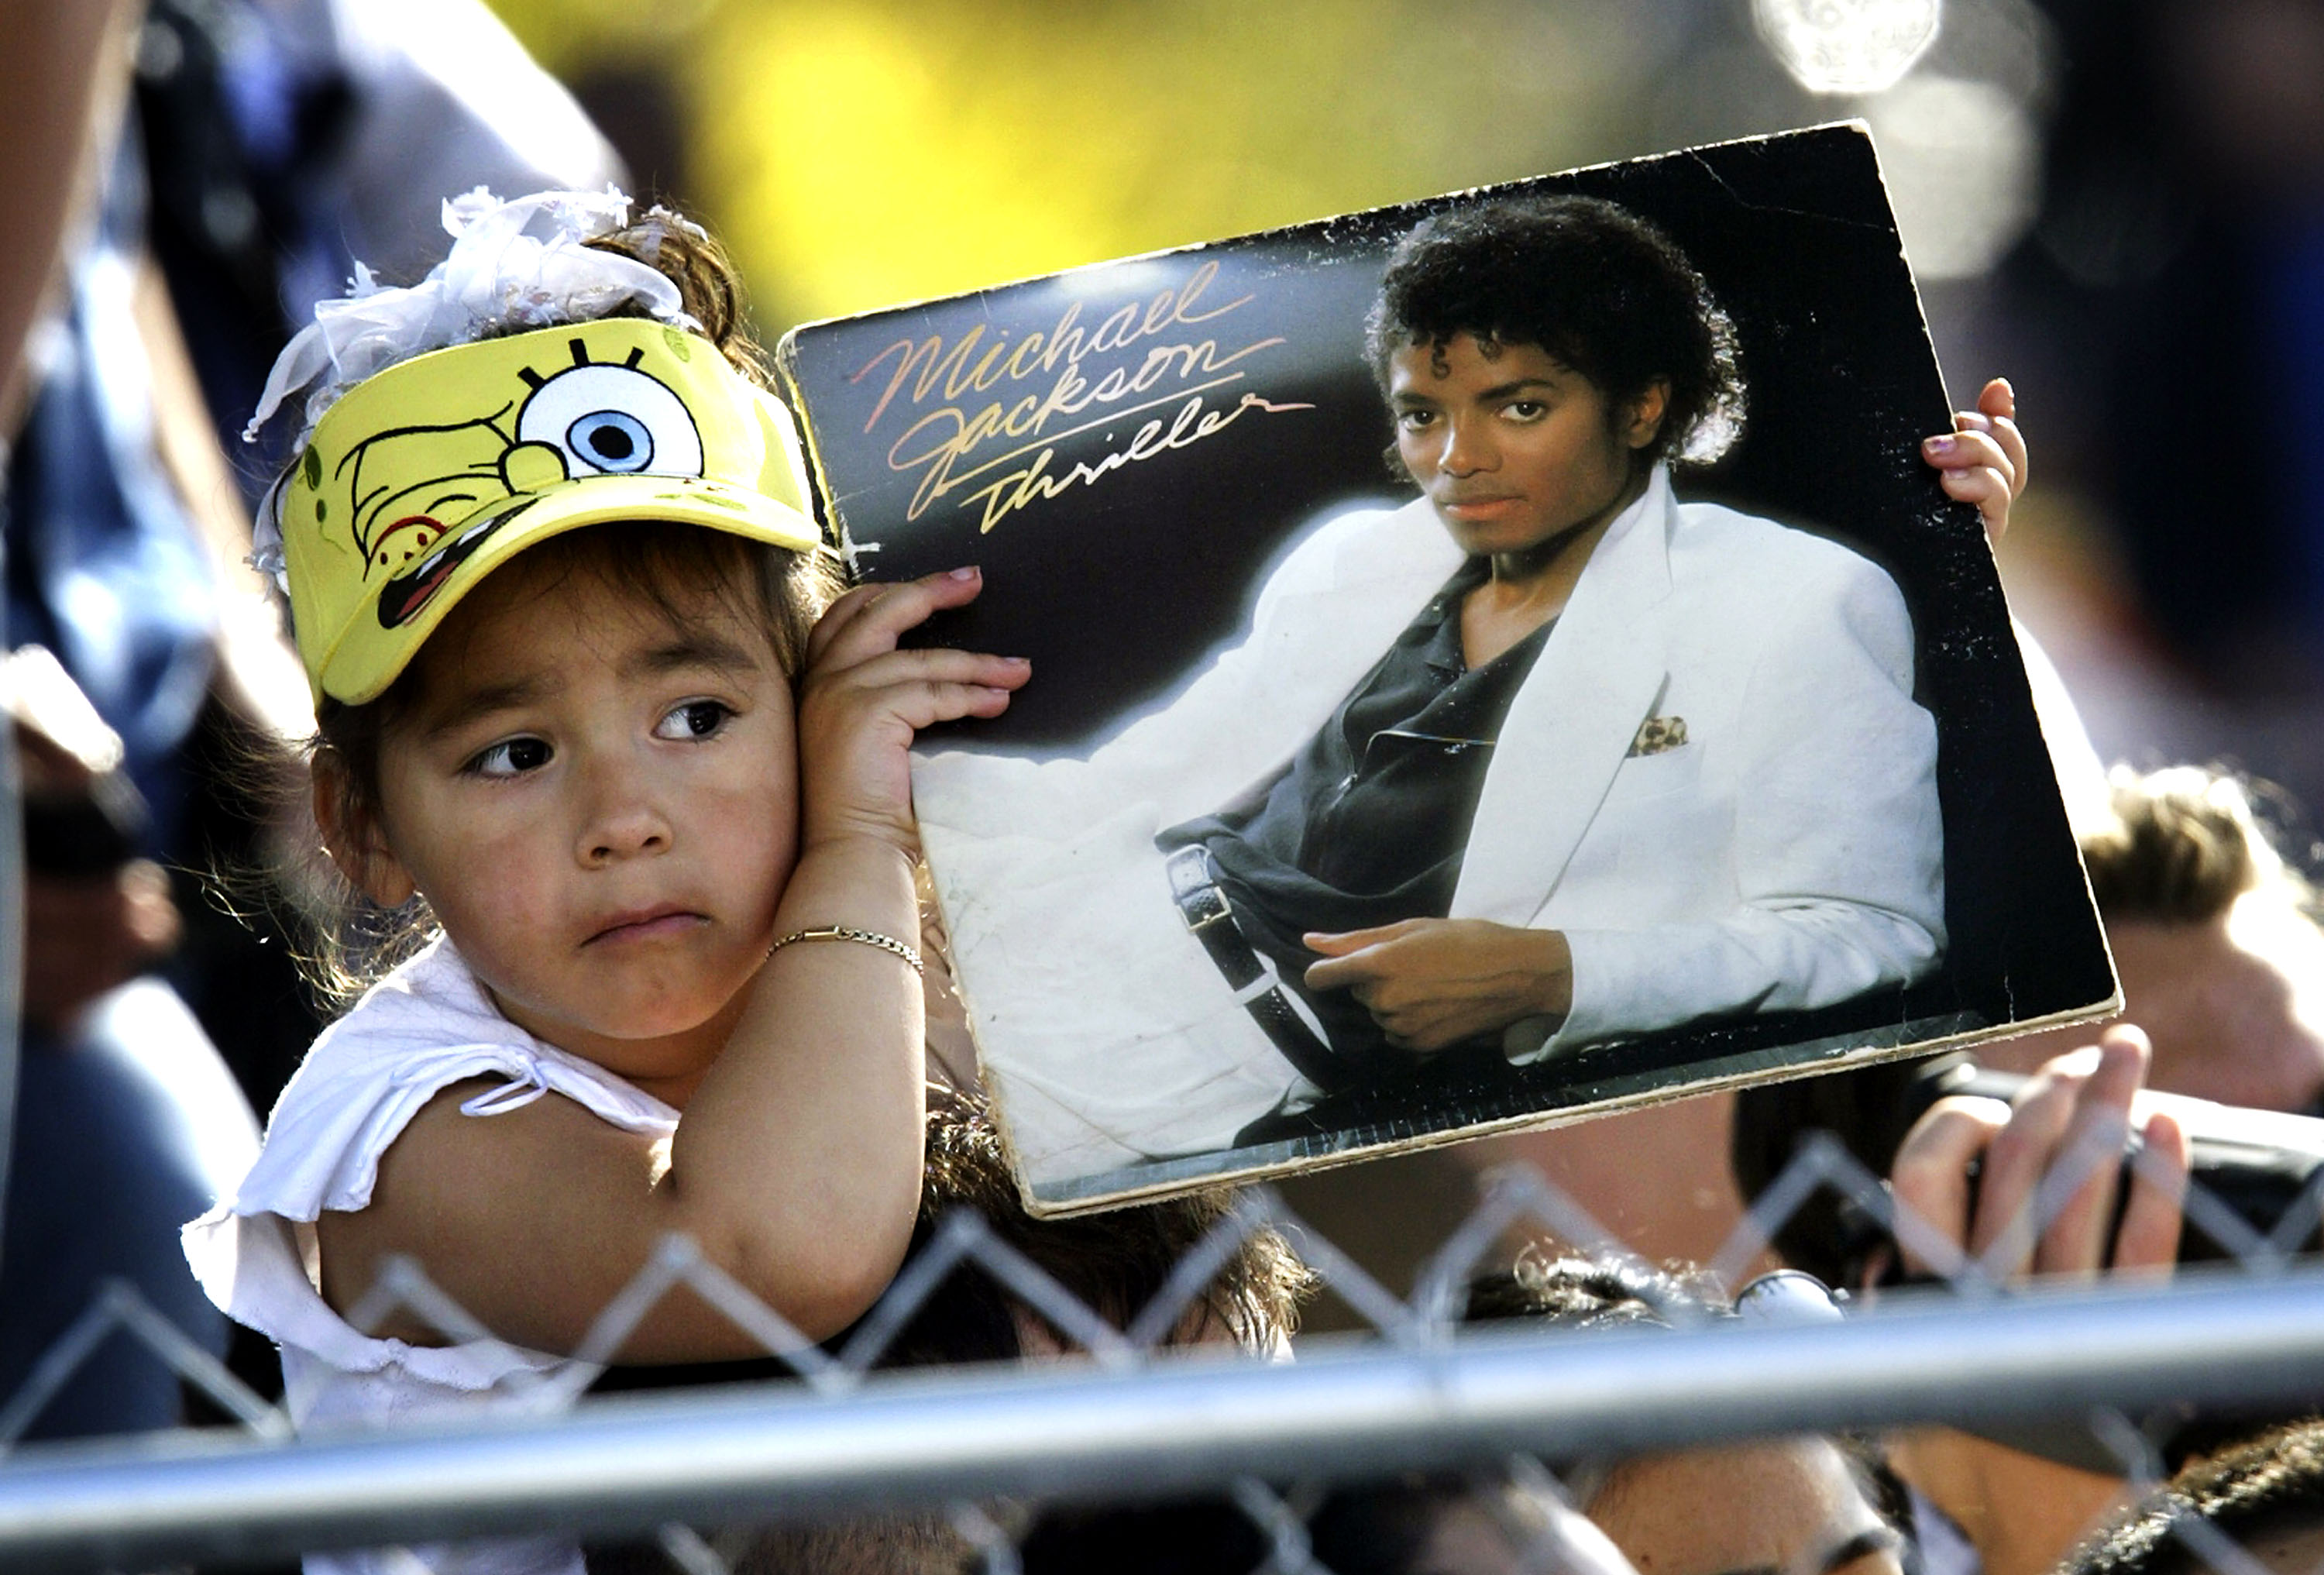 A child wearing a SpongeBob SquarePants hat with a copy of Thriller